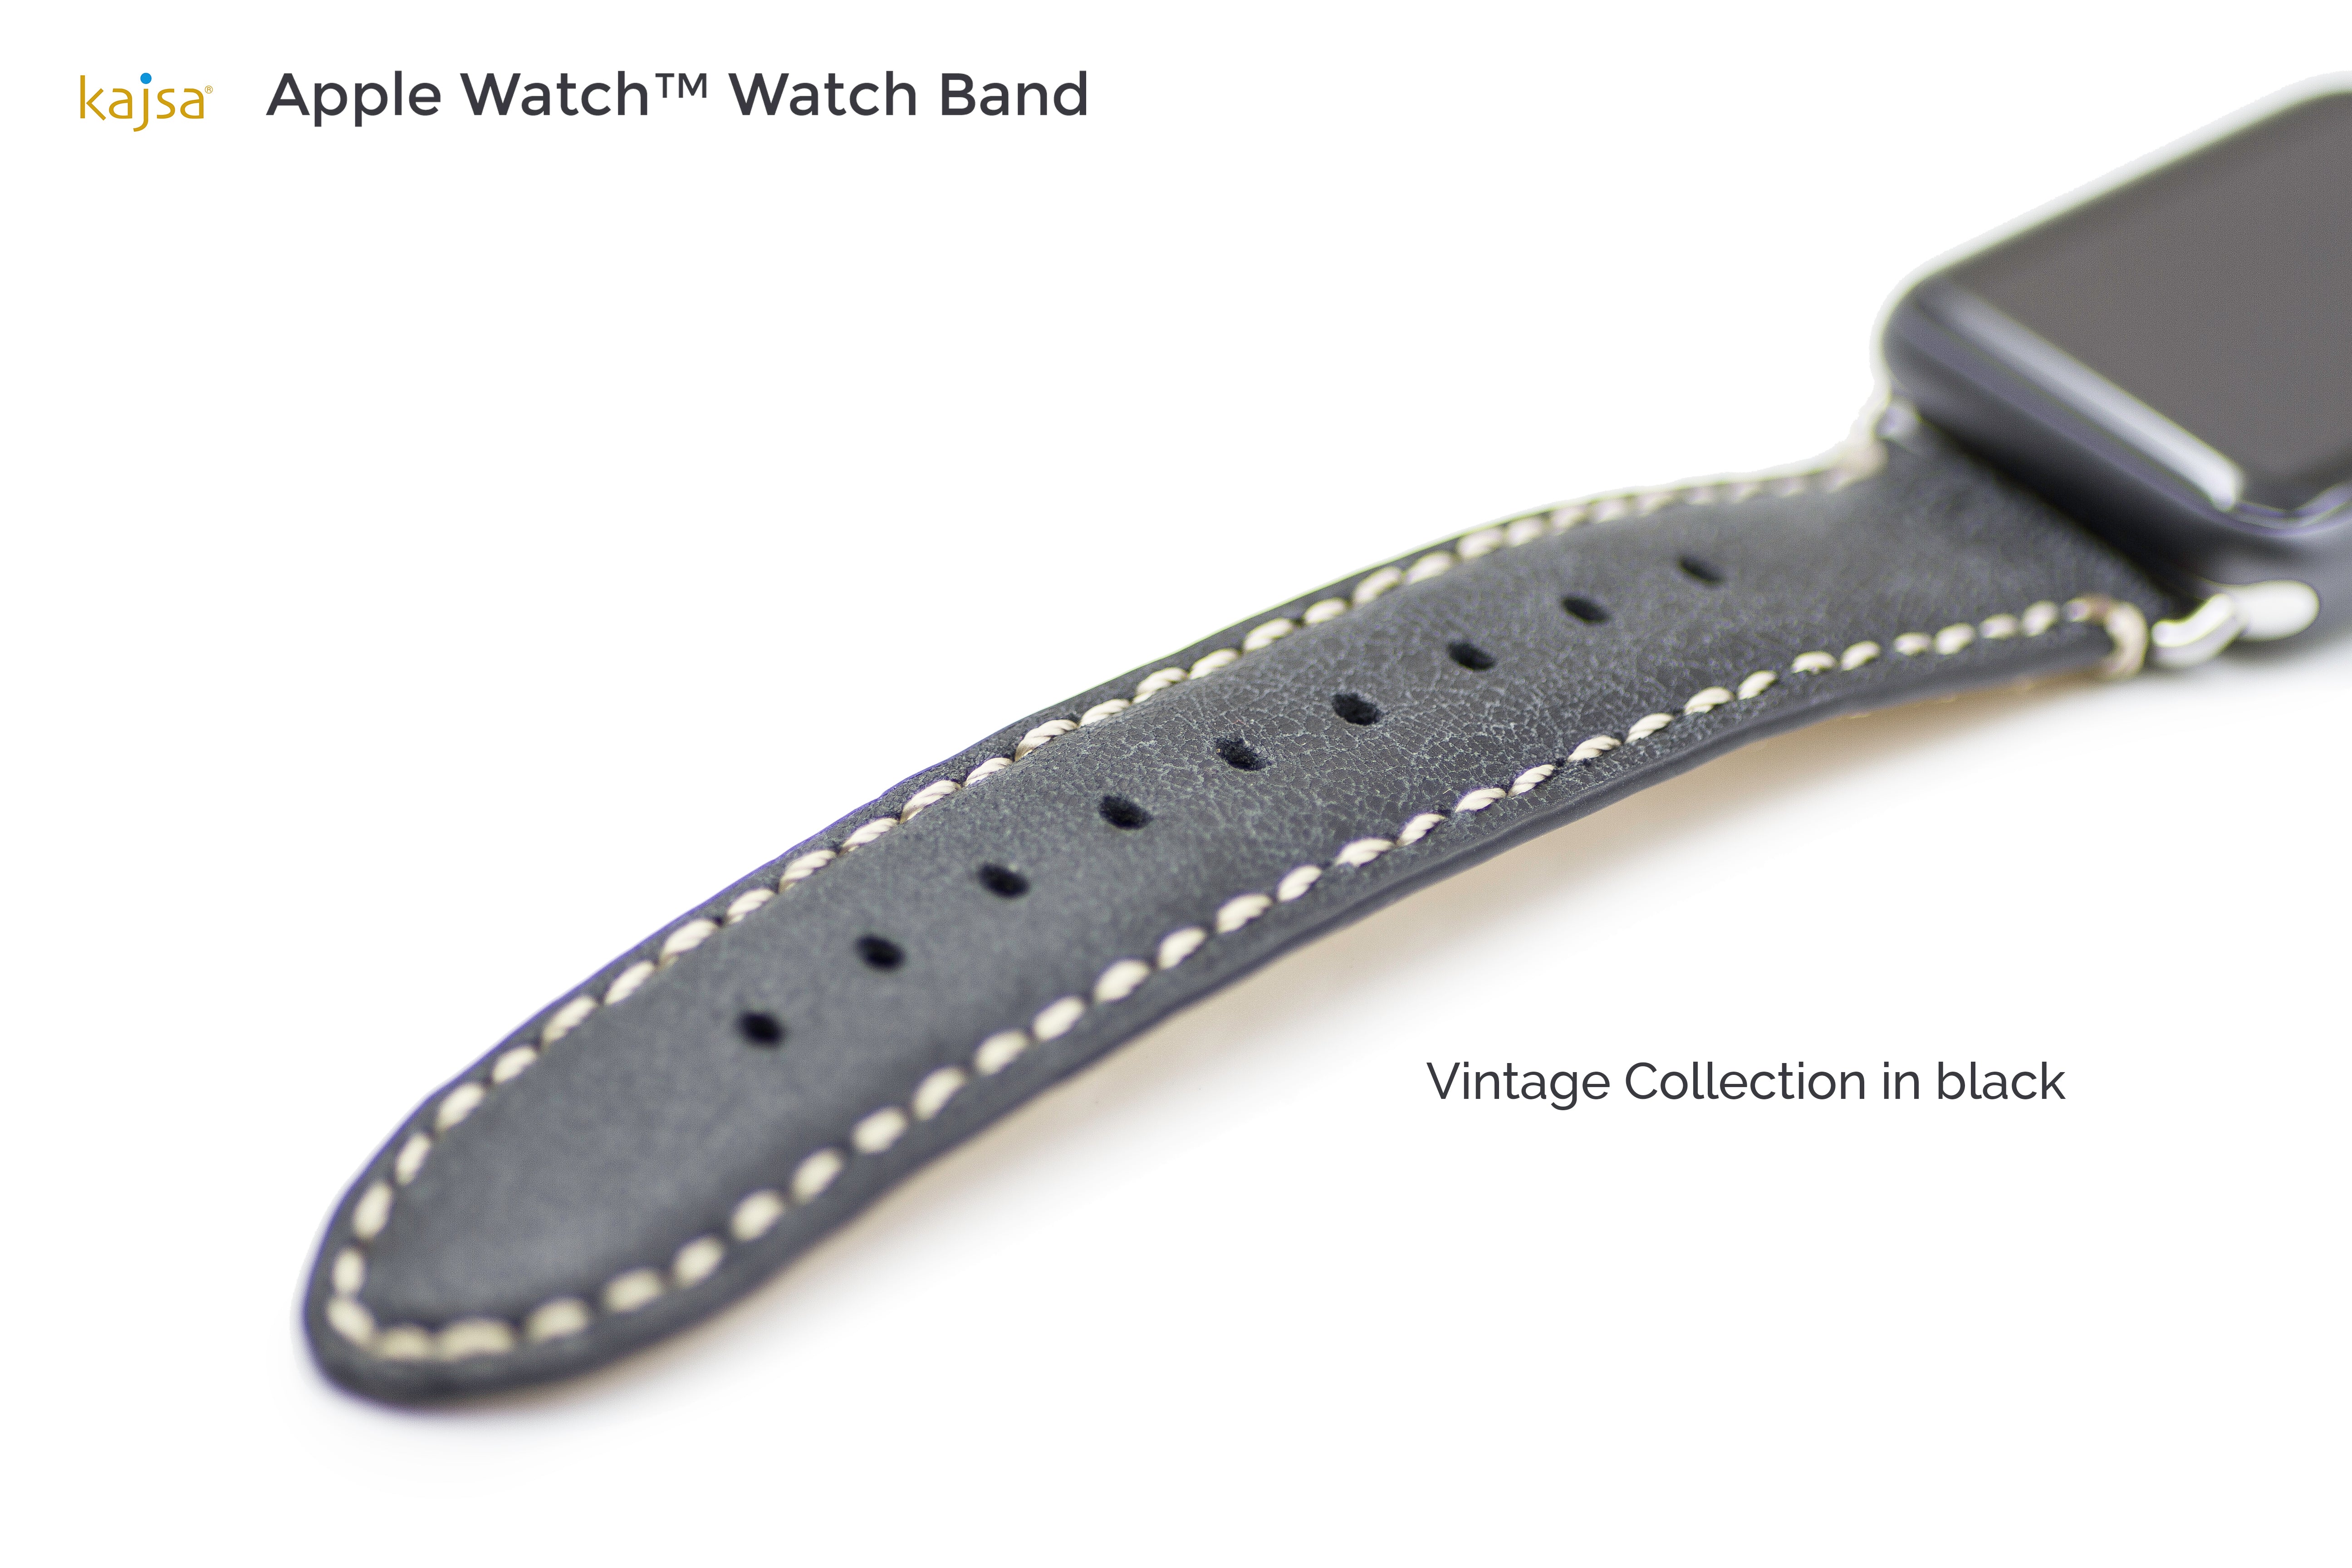 Vintage Collection - Handcrafted Apple Watch Band-Watch Band- phone case - phone cases- phone cover- iphone cover- iphone case- iphone cases- leather case- leather cases- DIYCASE - custom case - leather cover - hand strap case - croco pattern case - snake pattern case - carbon fiber phone case - phone case brand - unique phone case - high quality - phone case brand - protective case - buy phone case hong kong - online buy phone case - iphone‎手機殼 - 客製化手機殼 - samsung ‎手機殼 - 香港手機殼 - 買電話殼